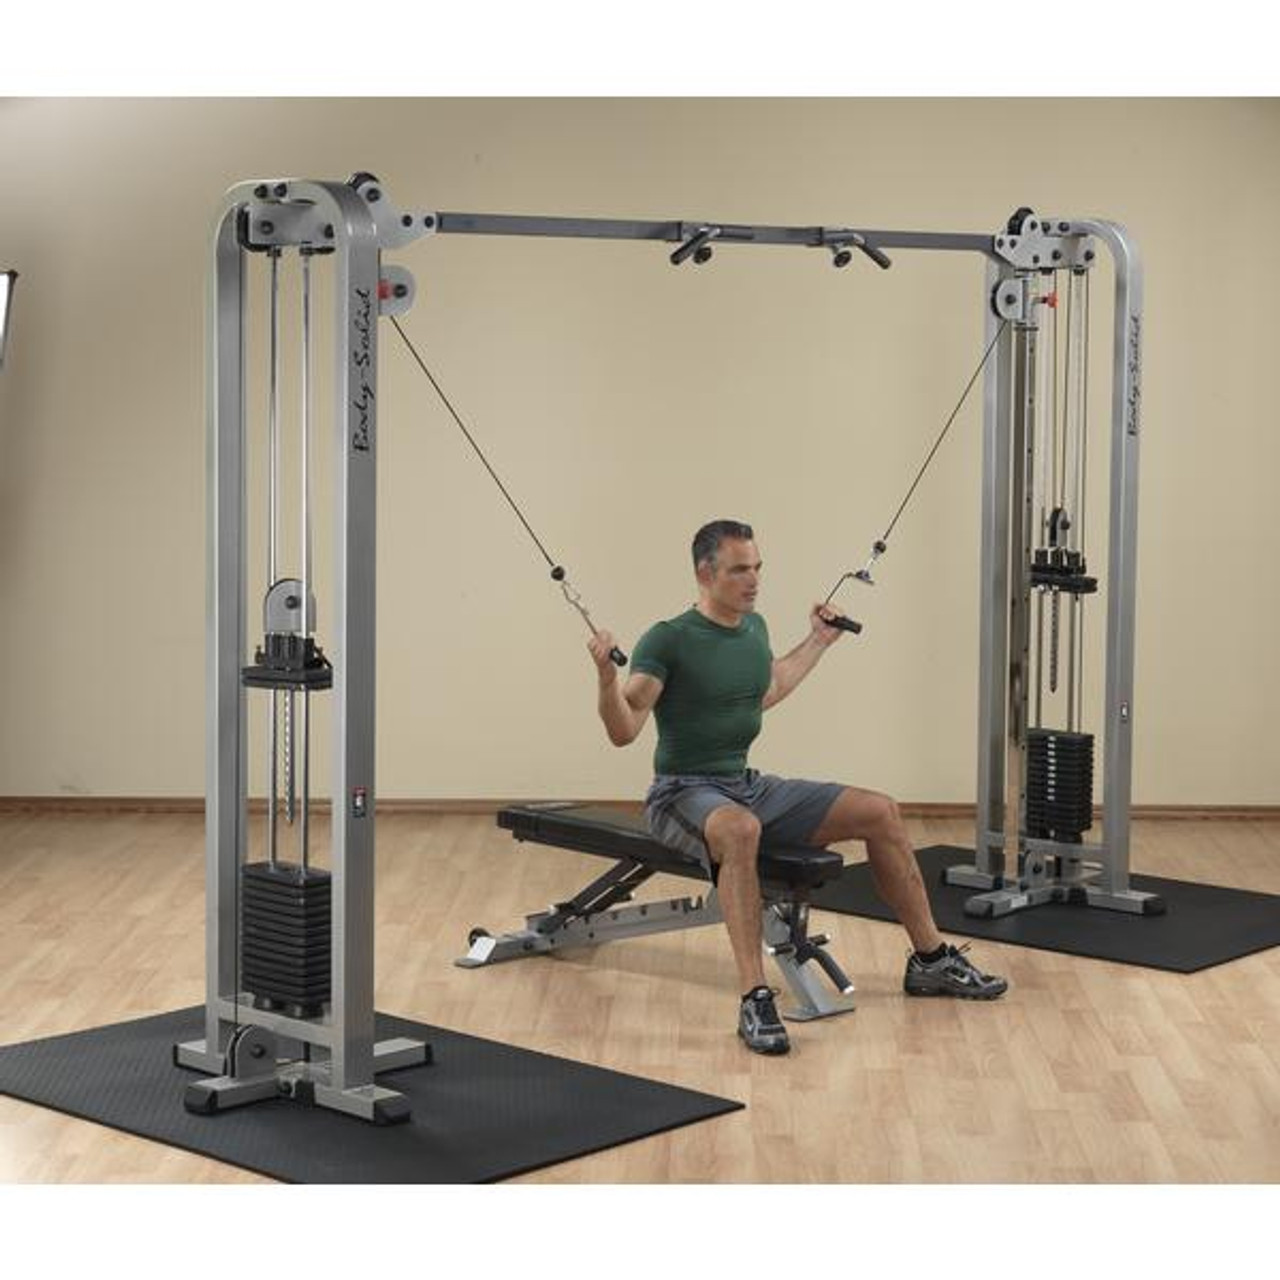 Body-Solid - PROCLUBLINE AB BENCH – Weight Room Equipment